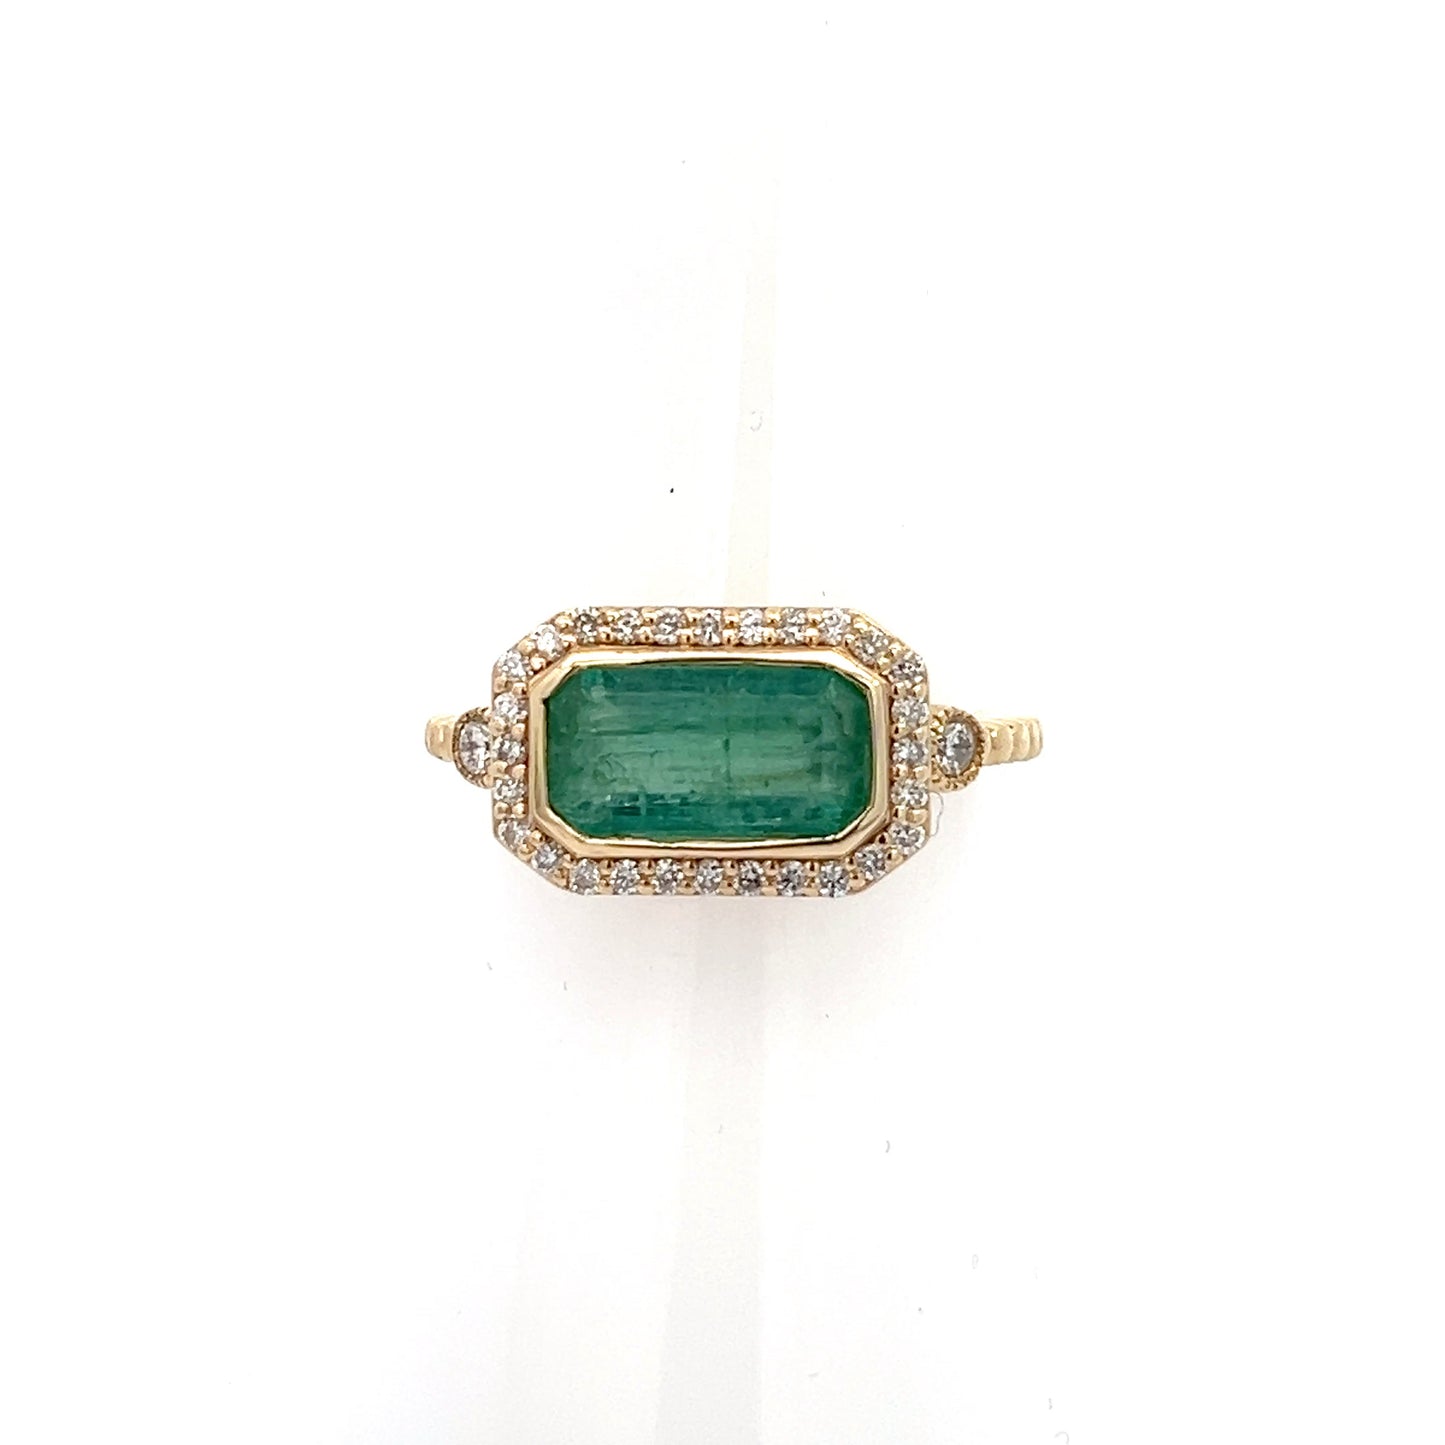 Natural Emerald and Diamond Ring 6.5 14k Y Gold 2.32 TCW Certified $4,950 310644